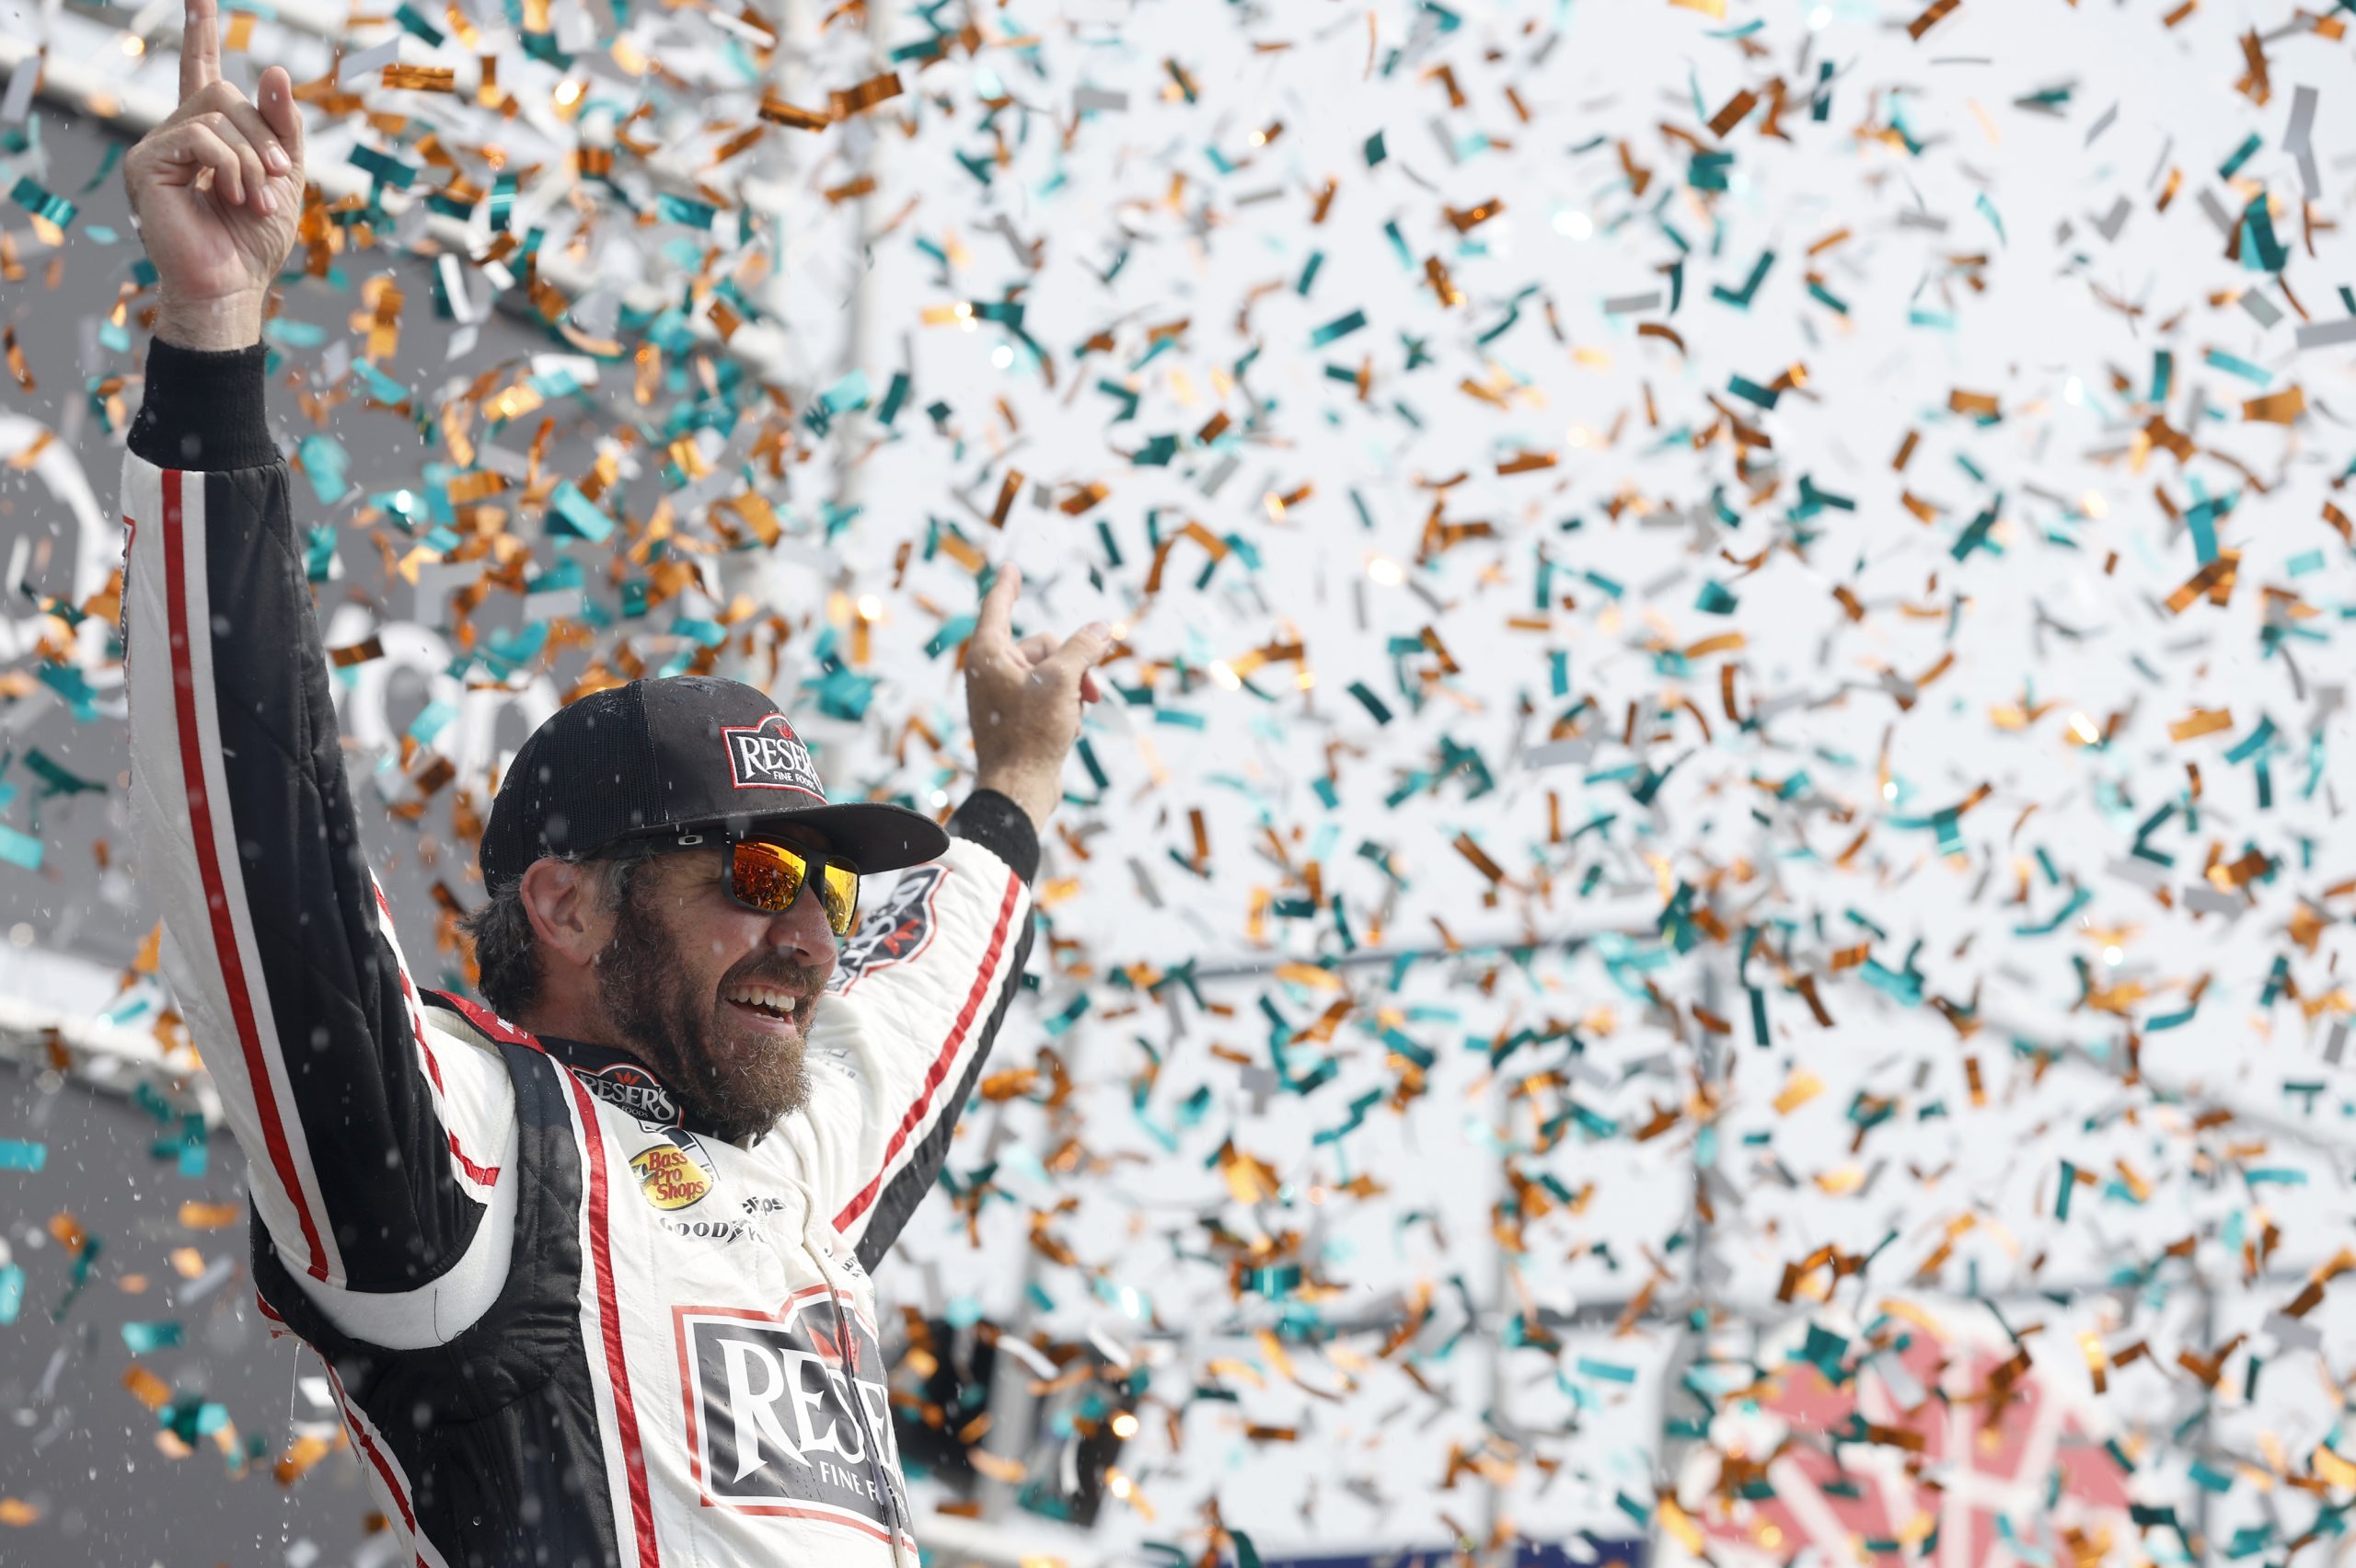 New Hampshire Speedway Victory with Martin Truex Jr